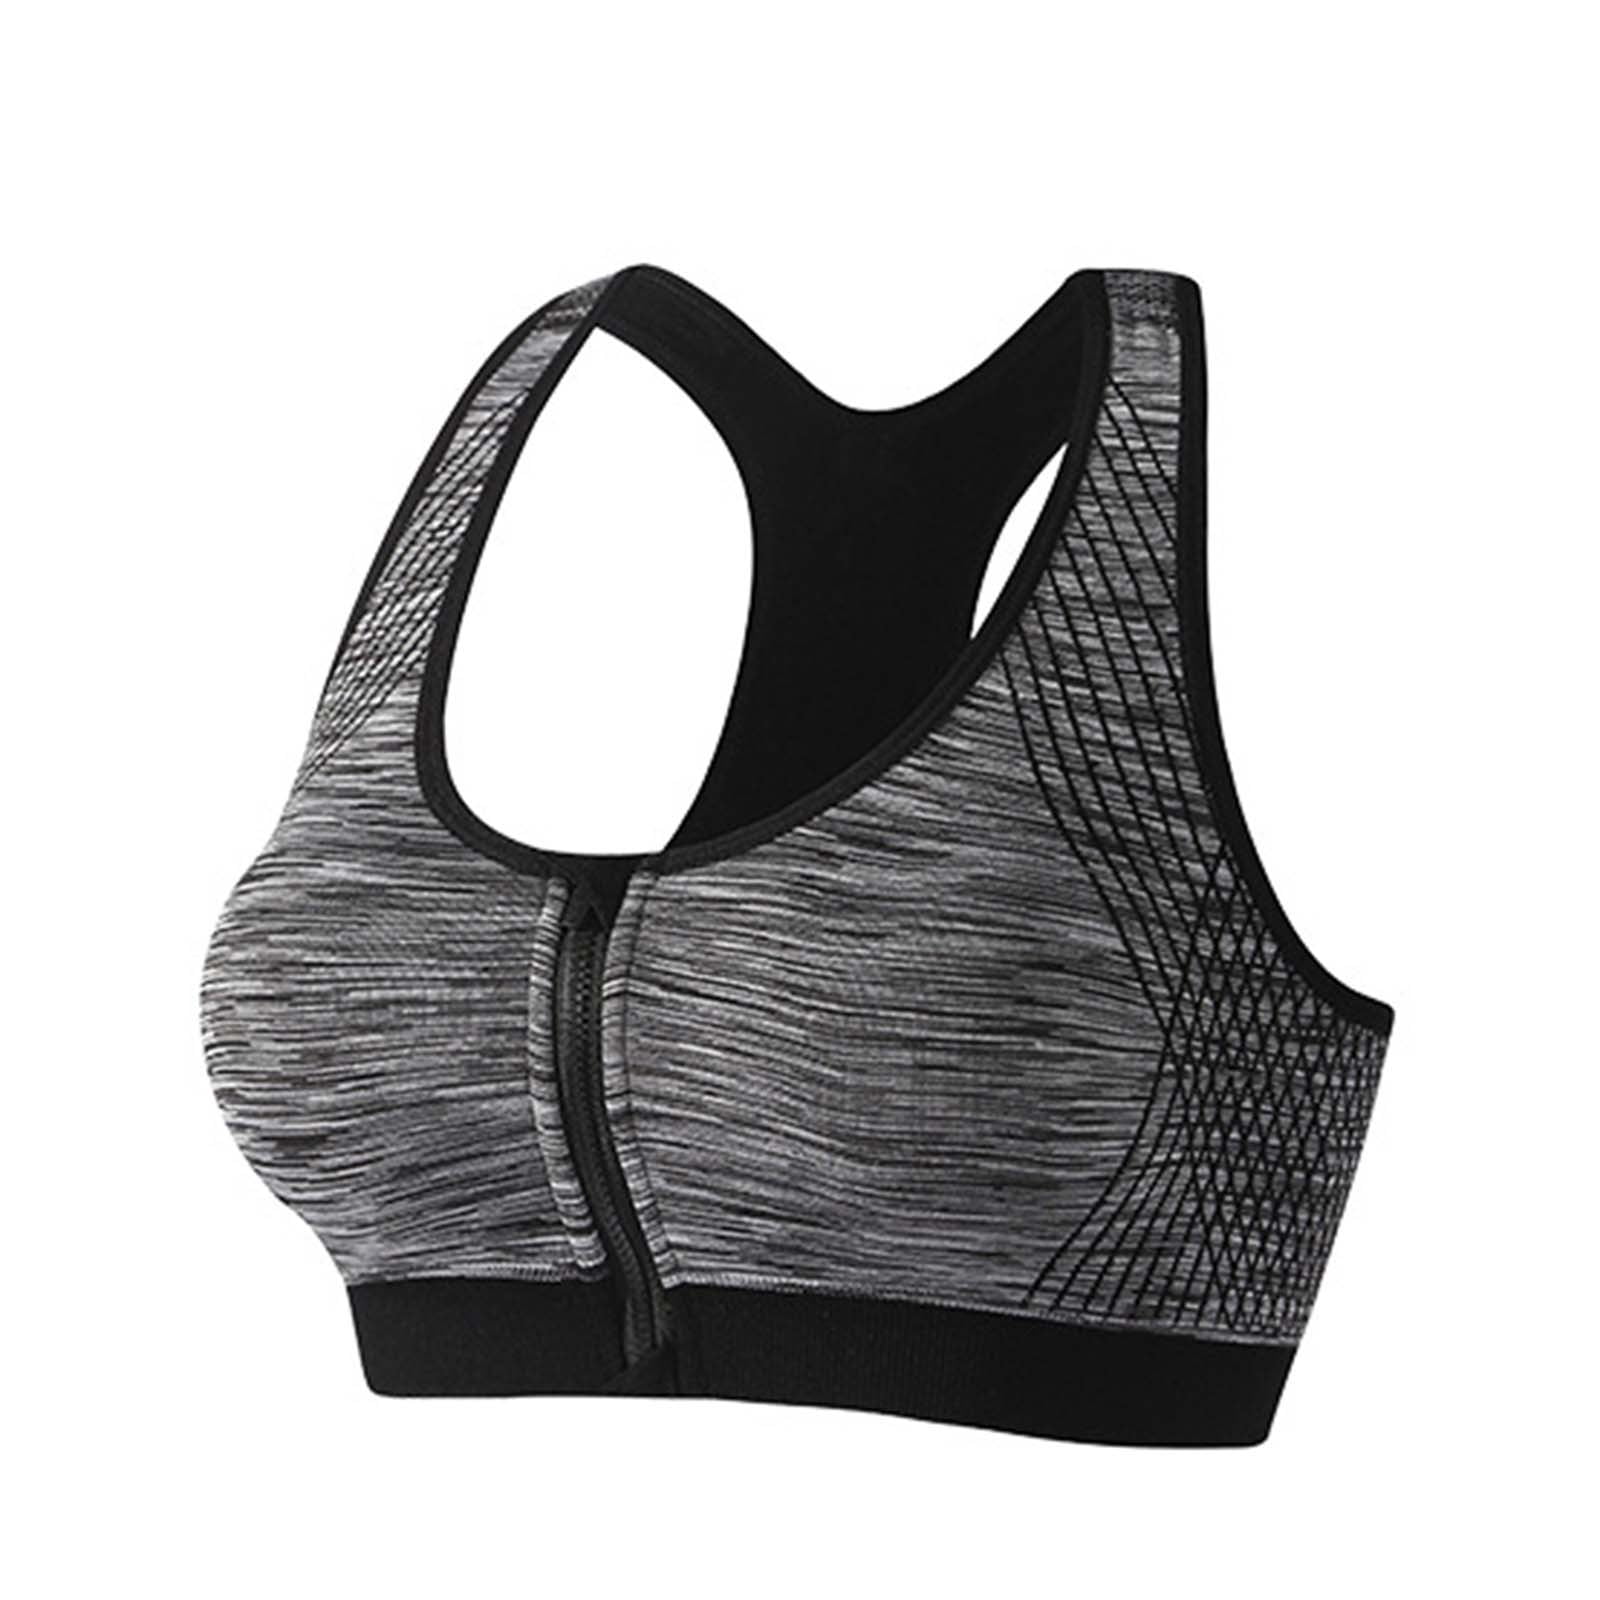 Buy Black Next Active Sports High Impact Zip Front Bra from Next